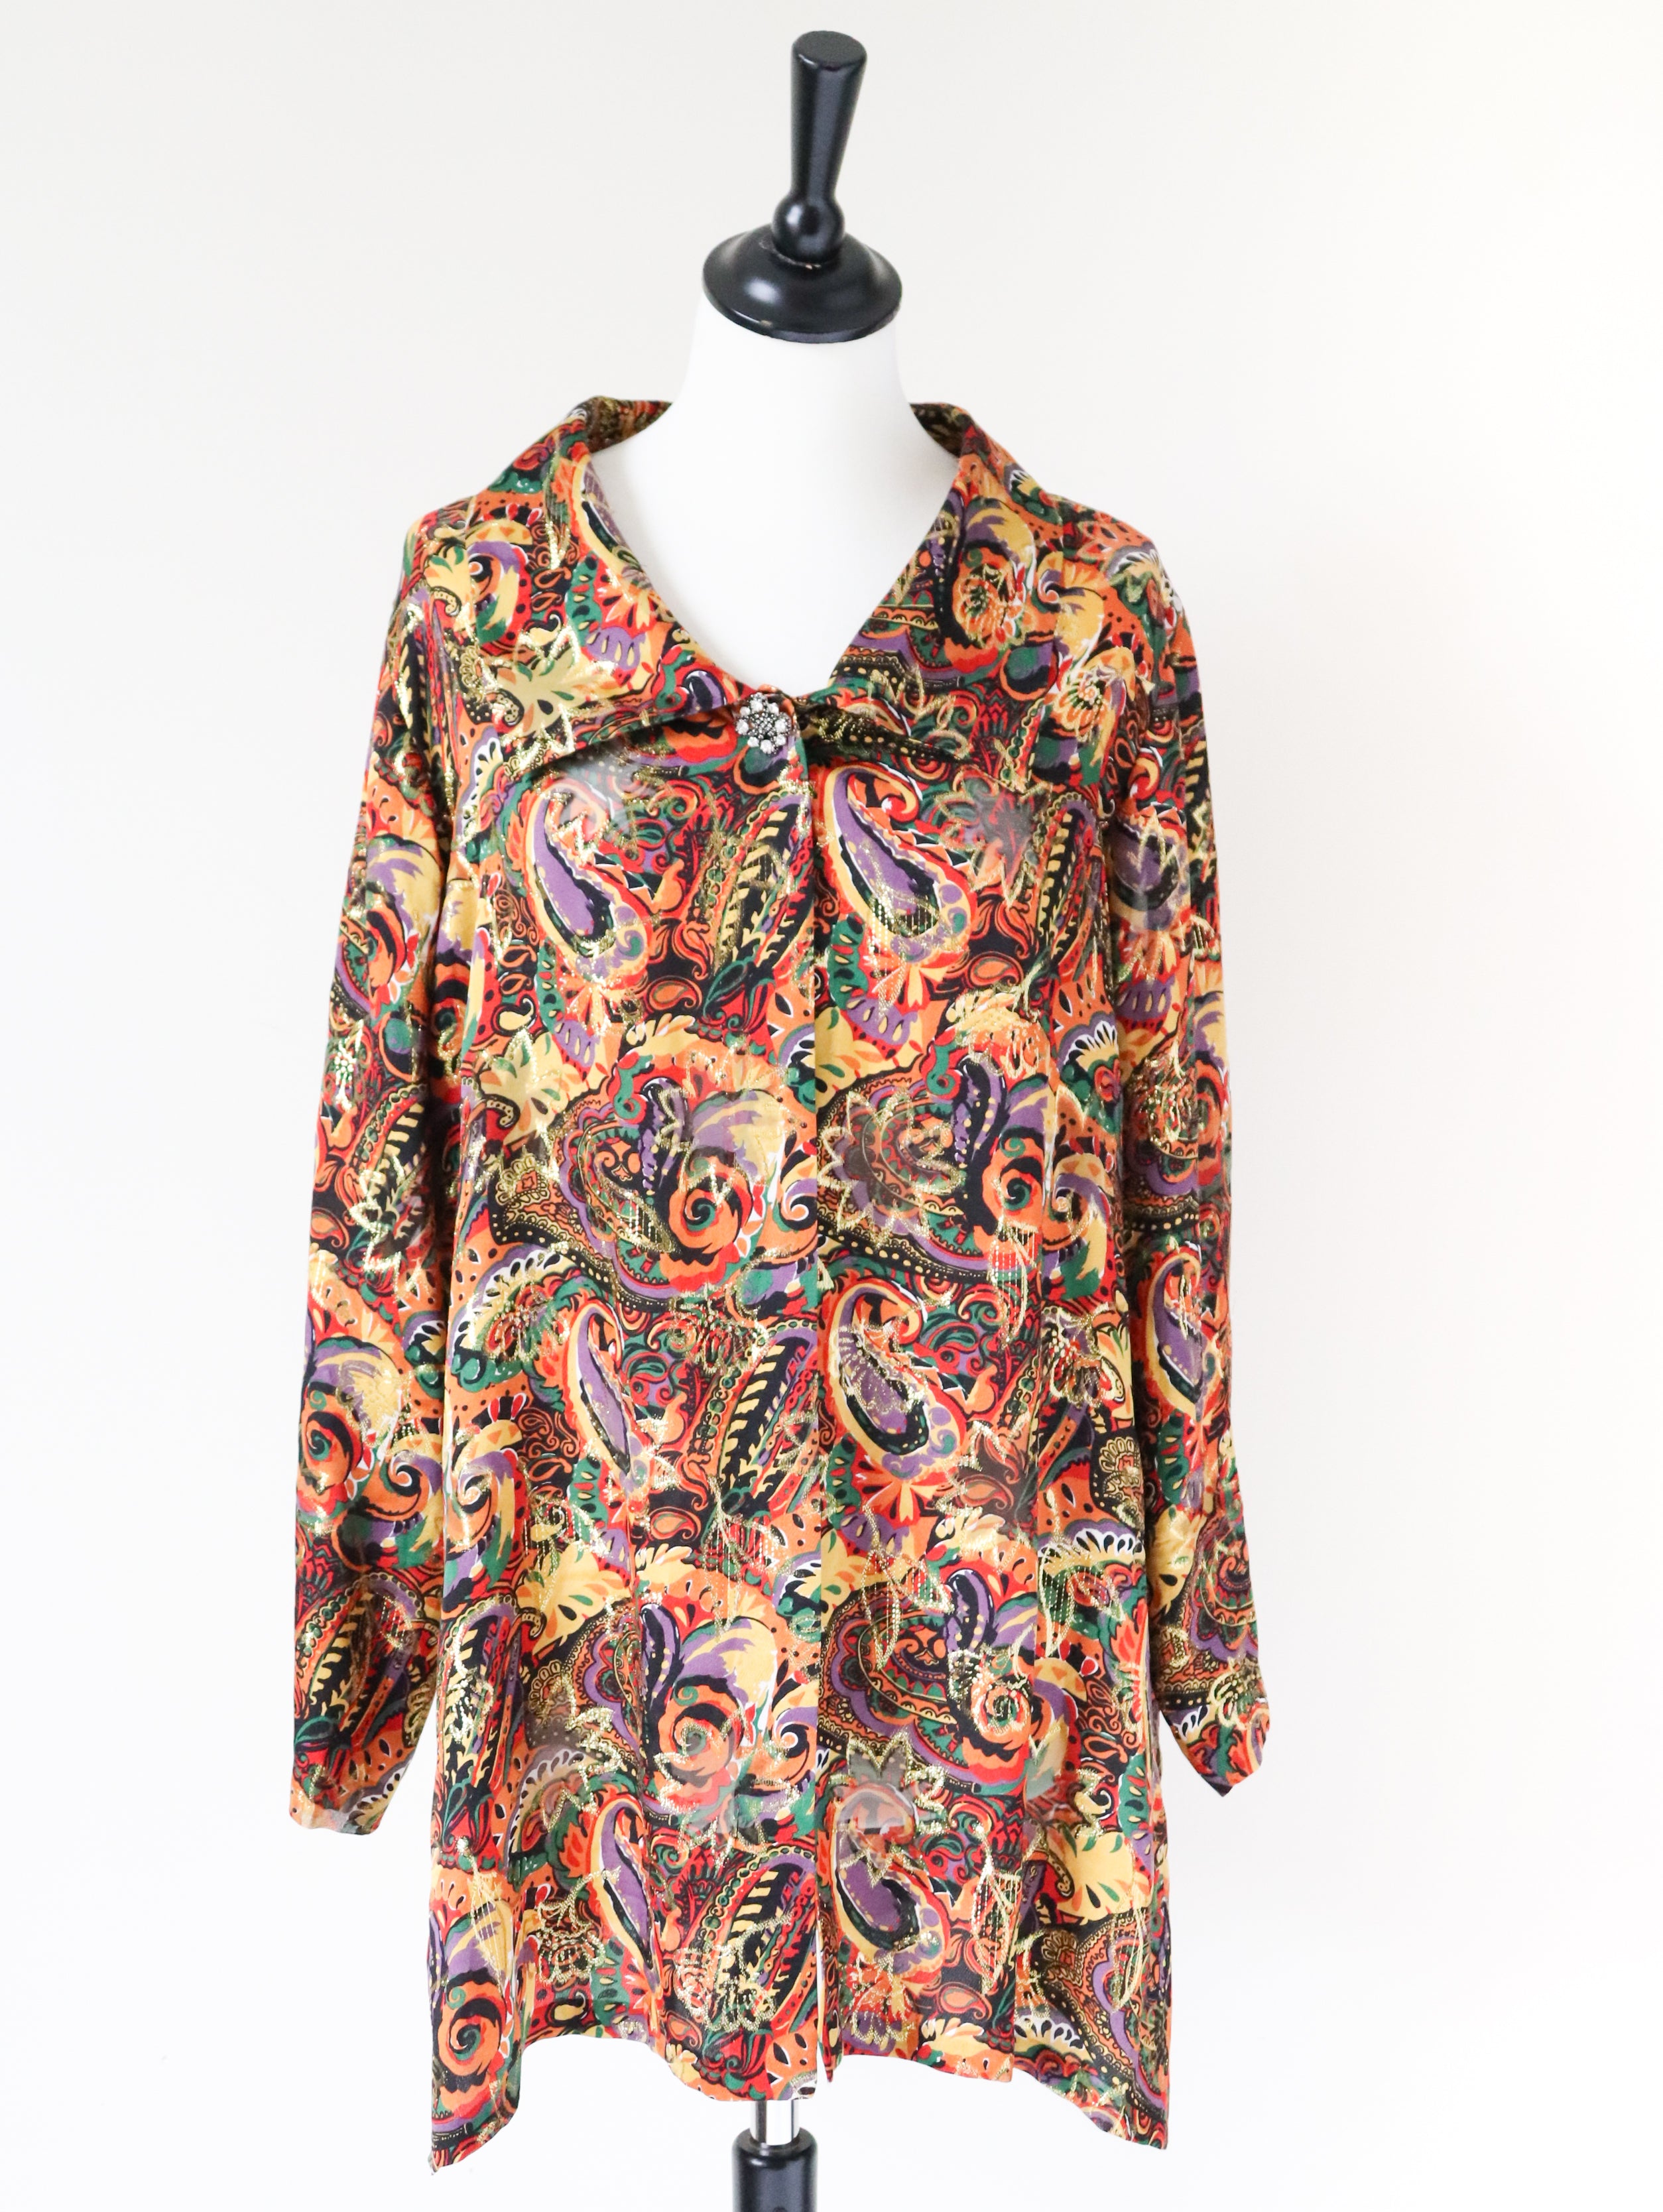 Coverall Silk Cardigan - See-Through - Sparkly Gold Paisley Pattern - Vintage - L / UK 14